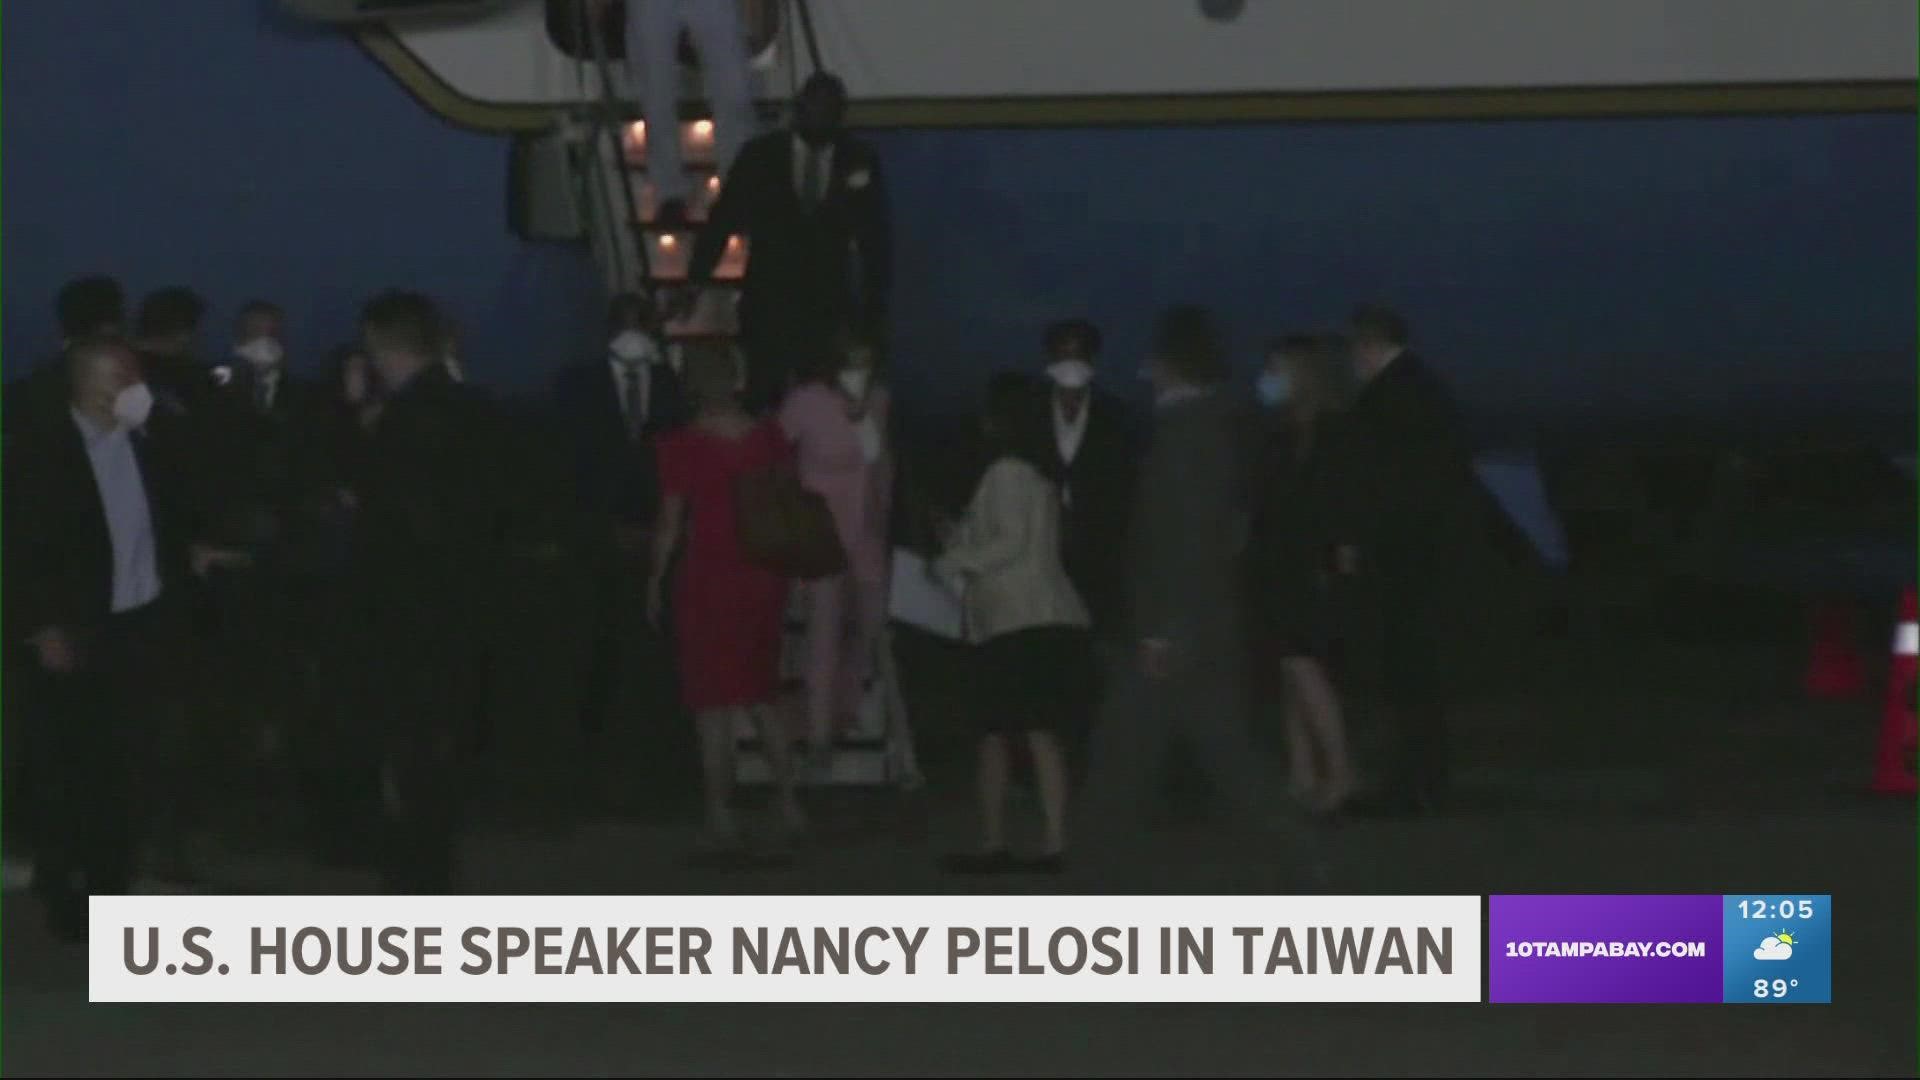 China had warned of “resolute and strong measures” if Pelosi went ahead with the trip.